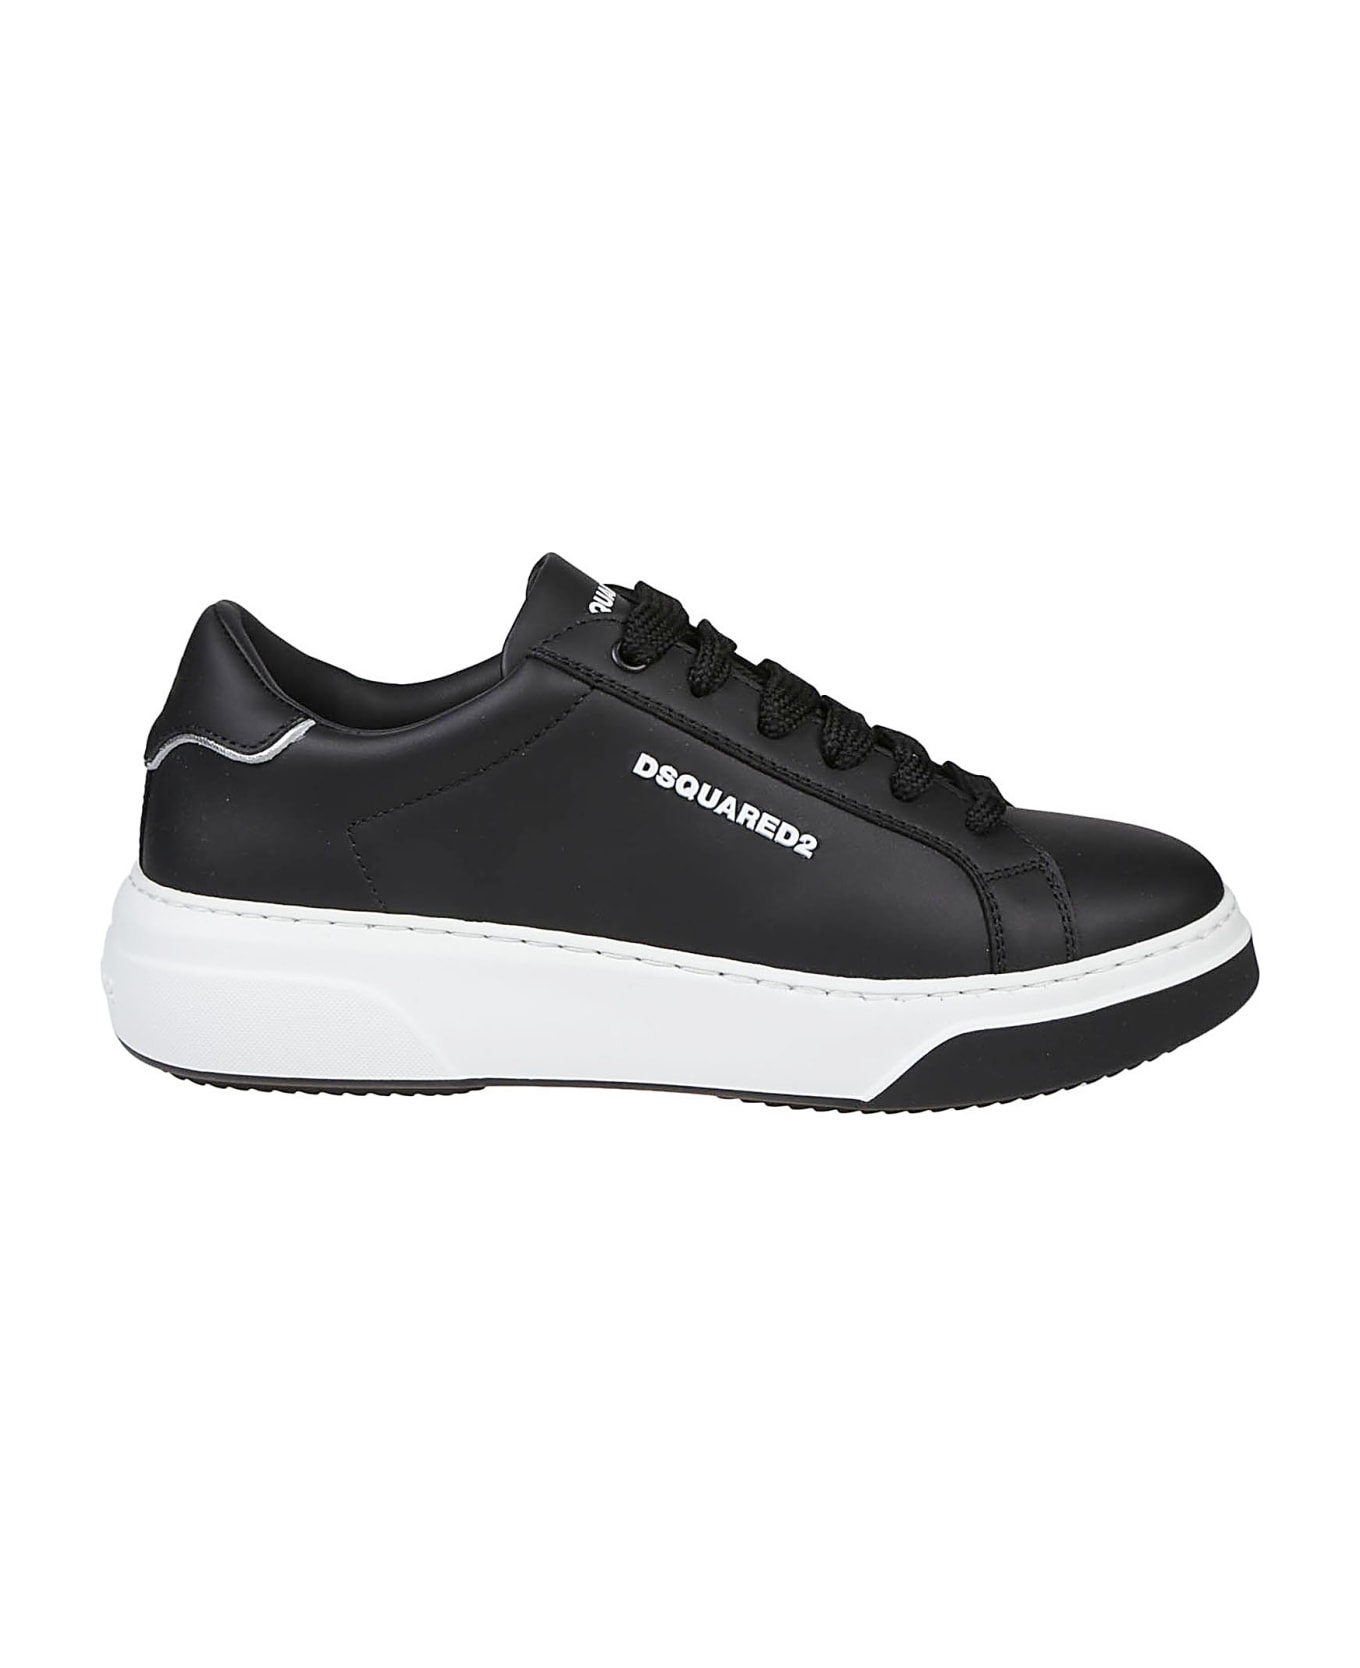 Dsquared2 Bumper Lace-up Low Top Sneakers - Nero/nero